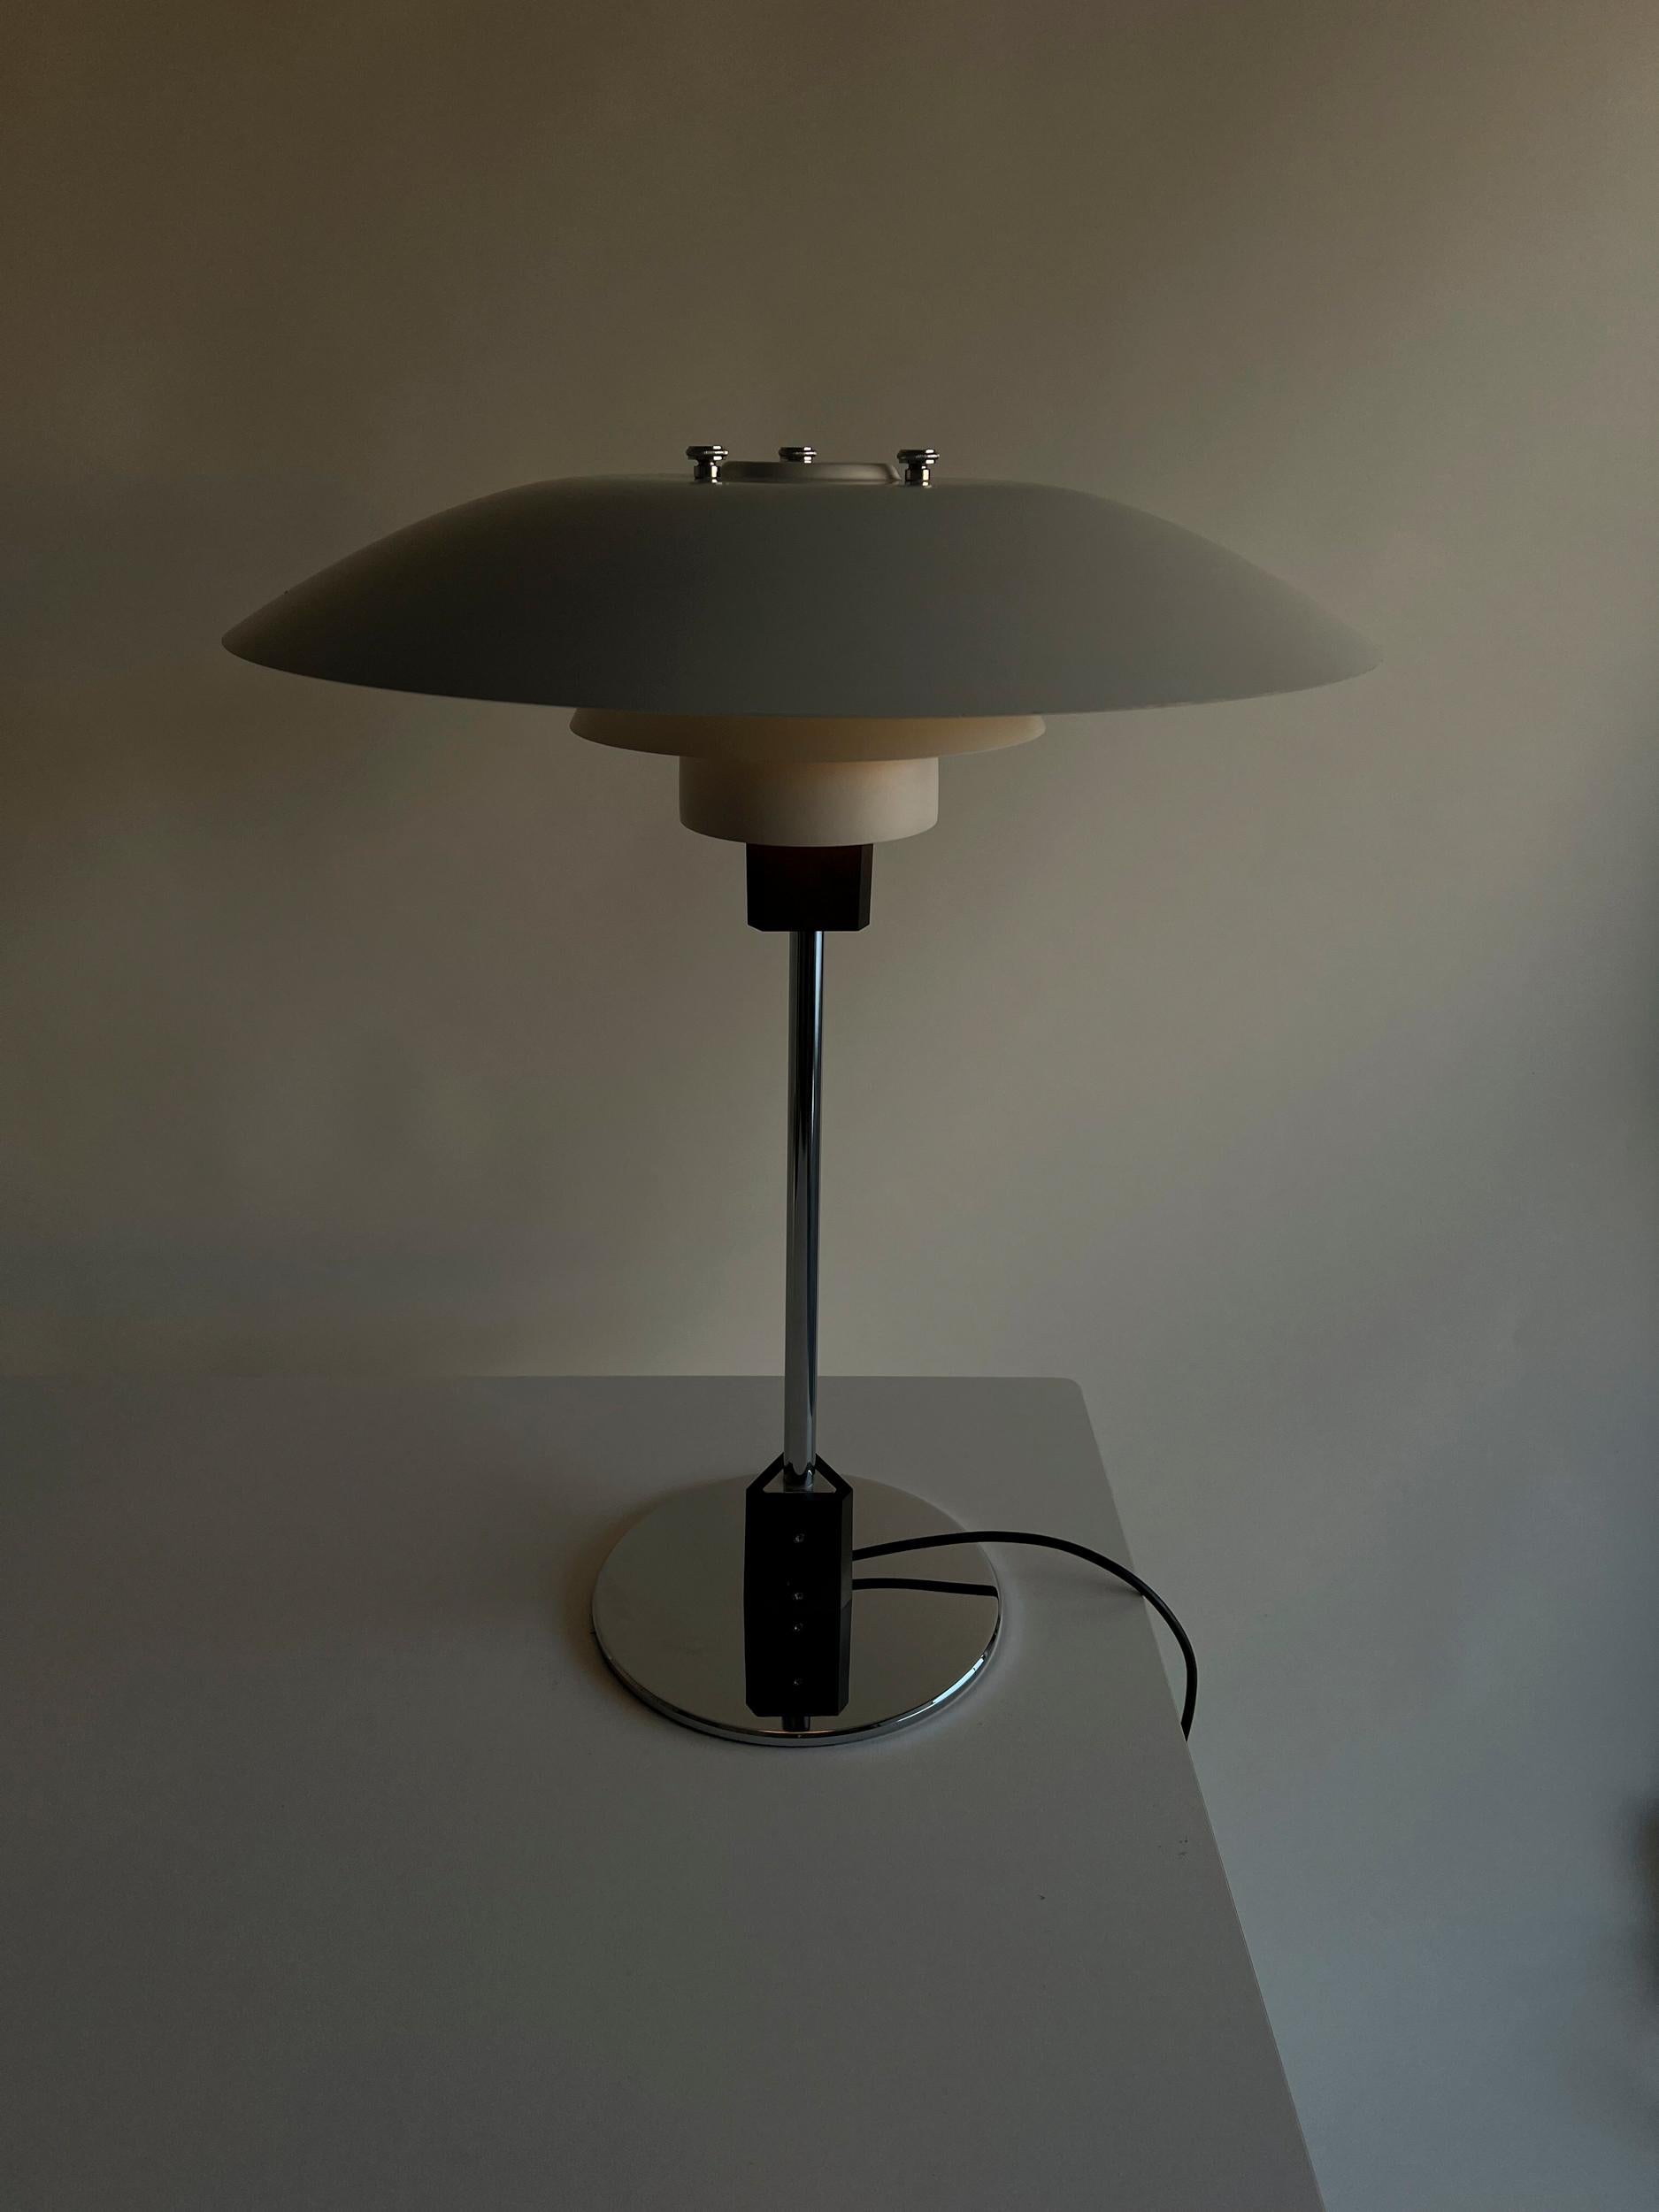 Simple, sophisticated and elegant is the best way to decribe this vintage table lamp by Poul Henningsen for Poulsen. Frankly I love all Poulsen lamps, especially when they are vintage. This one is dated 1983.

In very good condition.

Designer: Poul